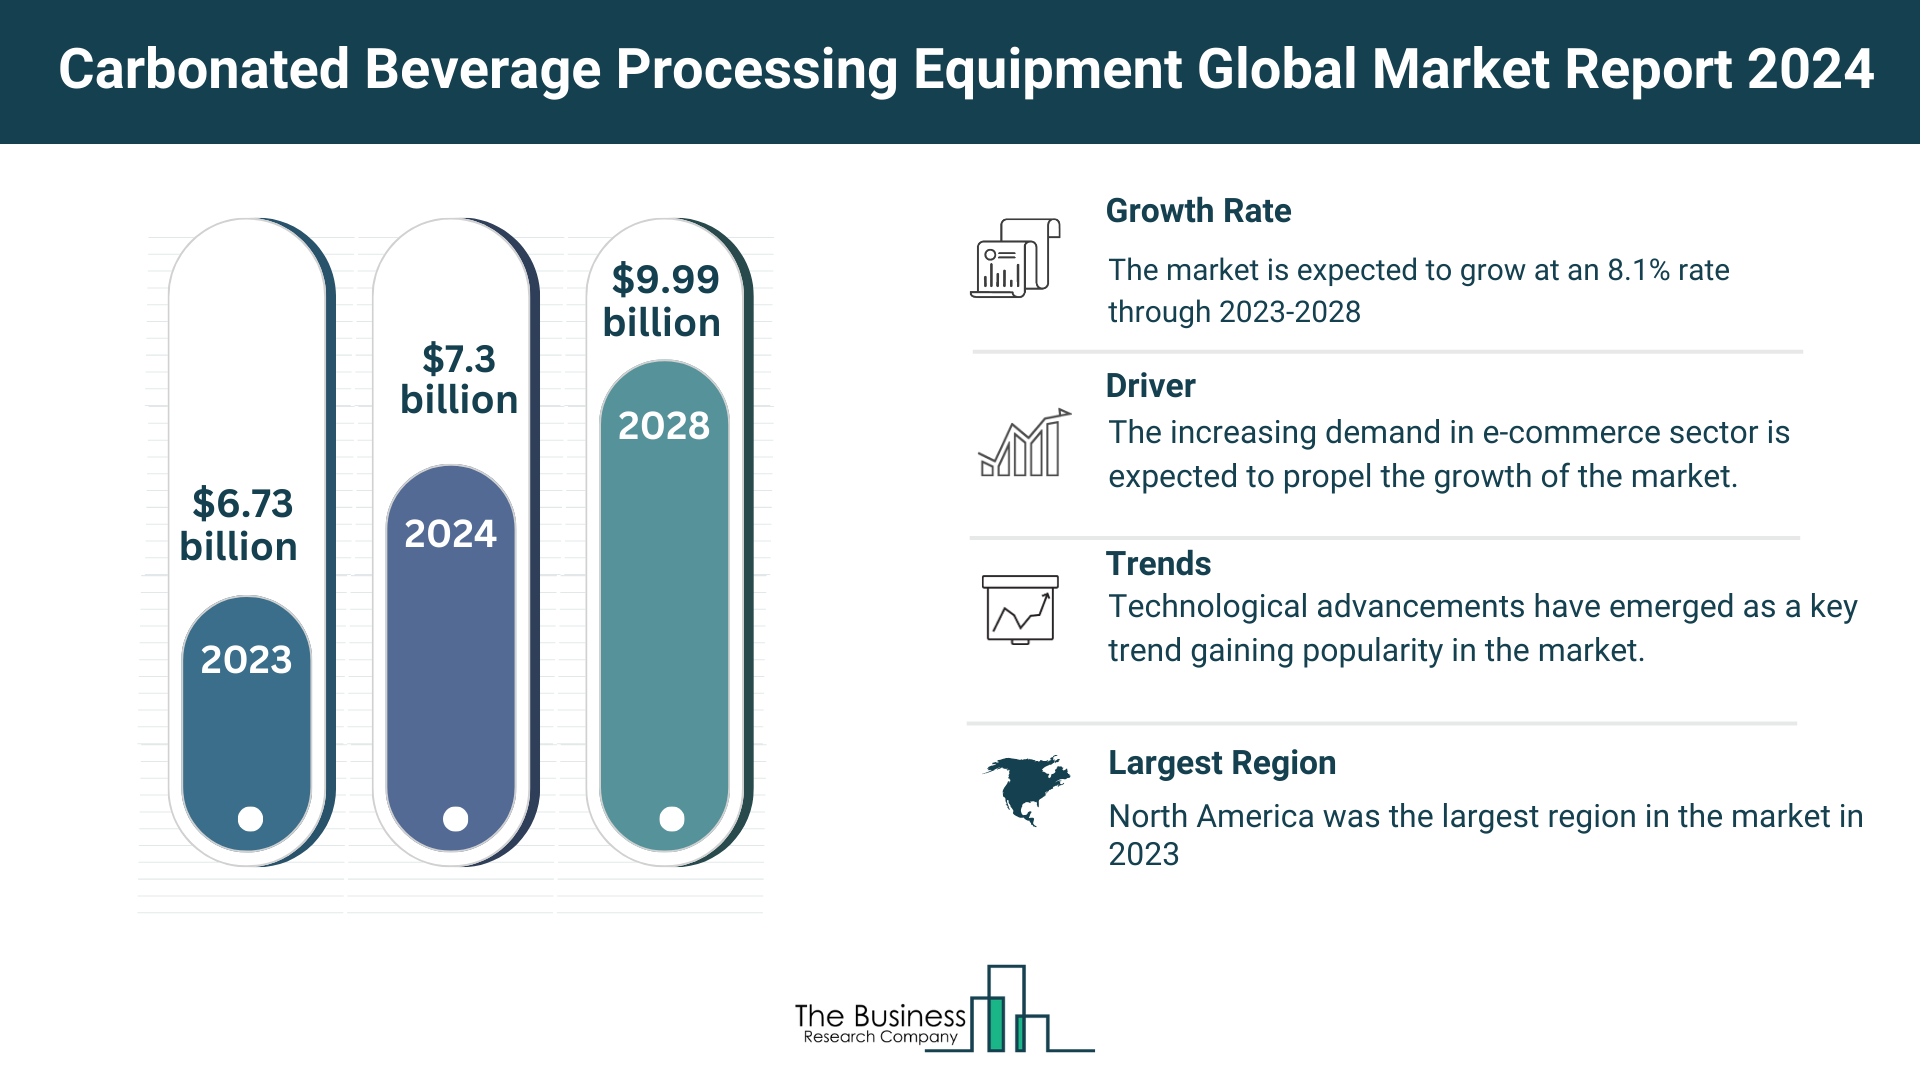 How Is the Carbonated Beverage Processing Equipment Market Expected To Grow Through 2024-2033?